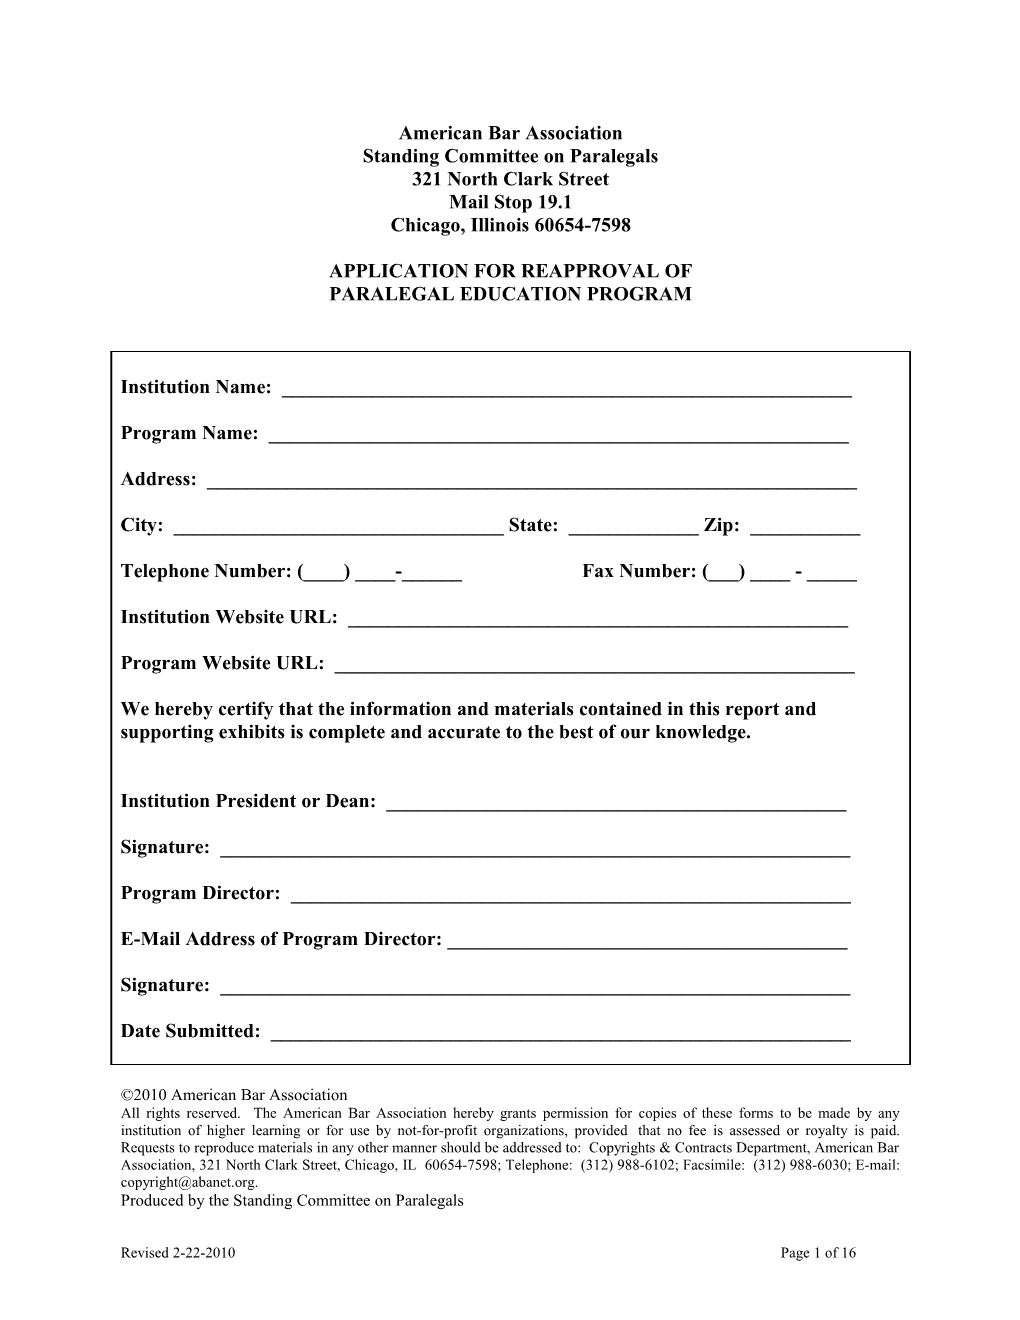 Application for Reapproval of Paralegal Education Program